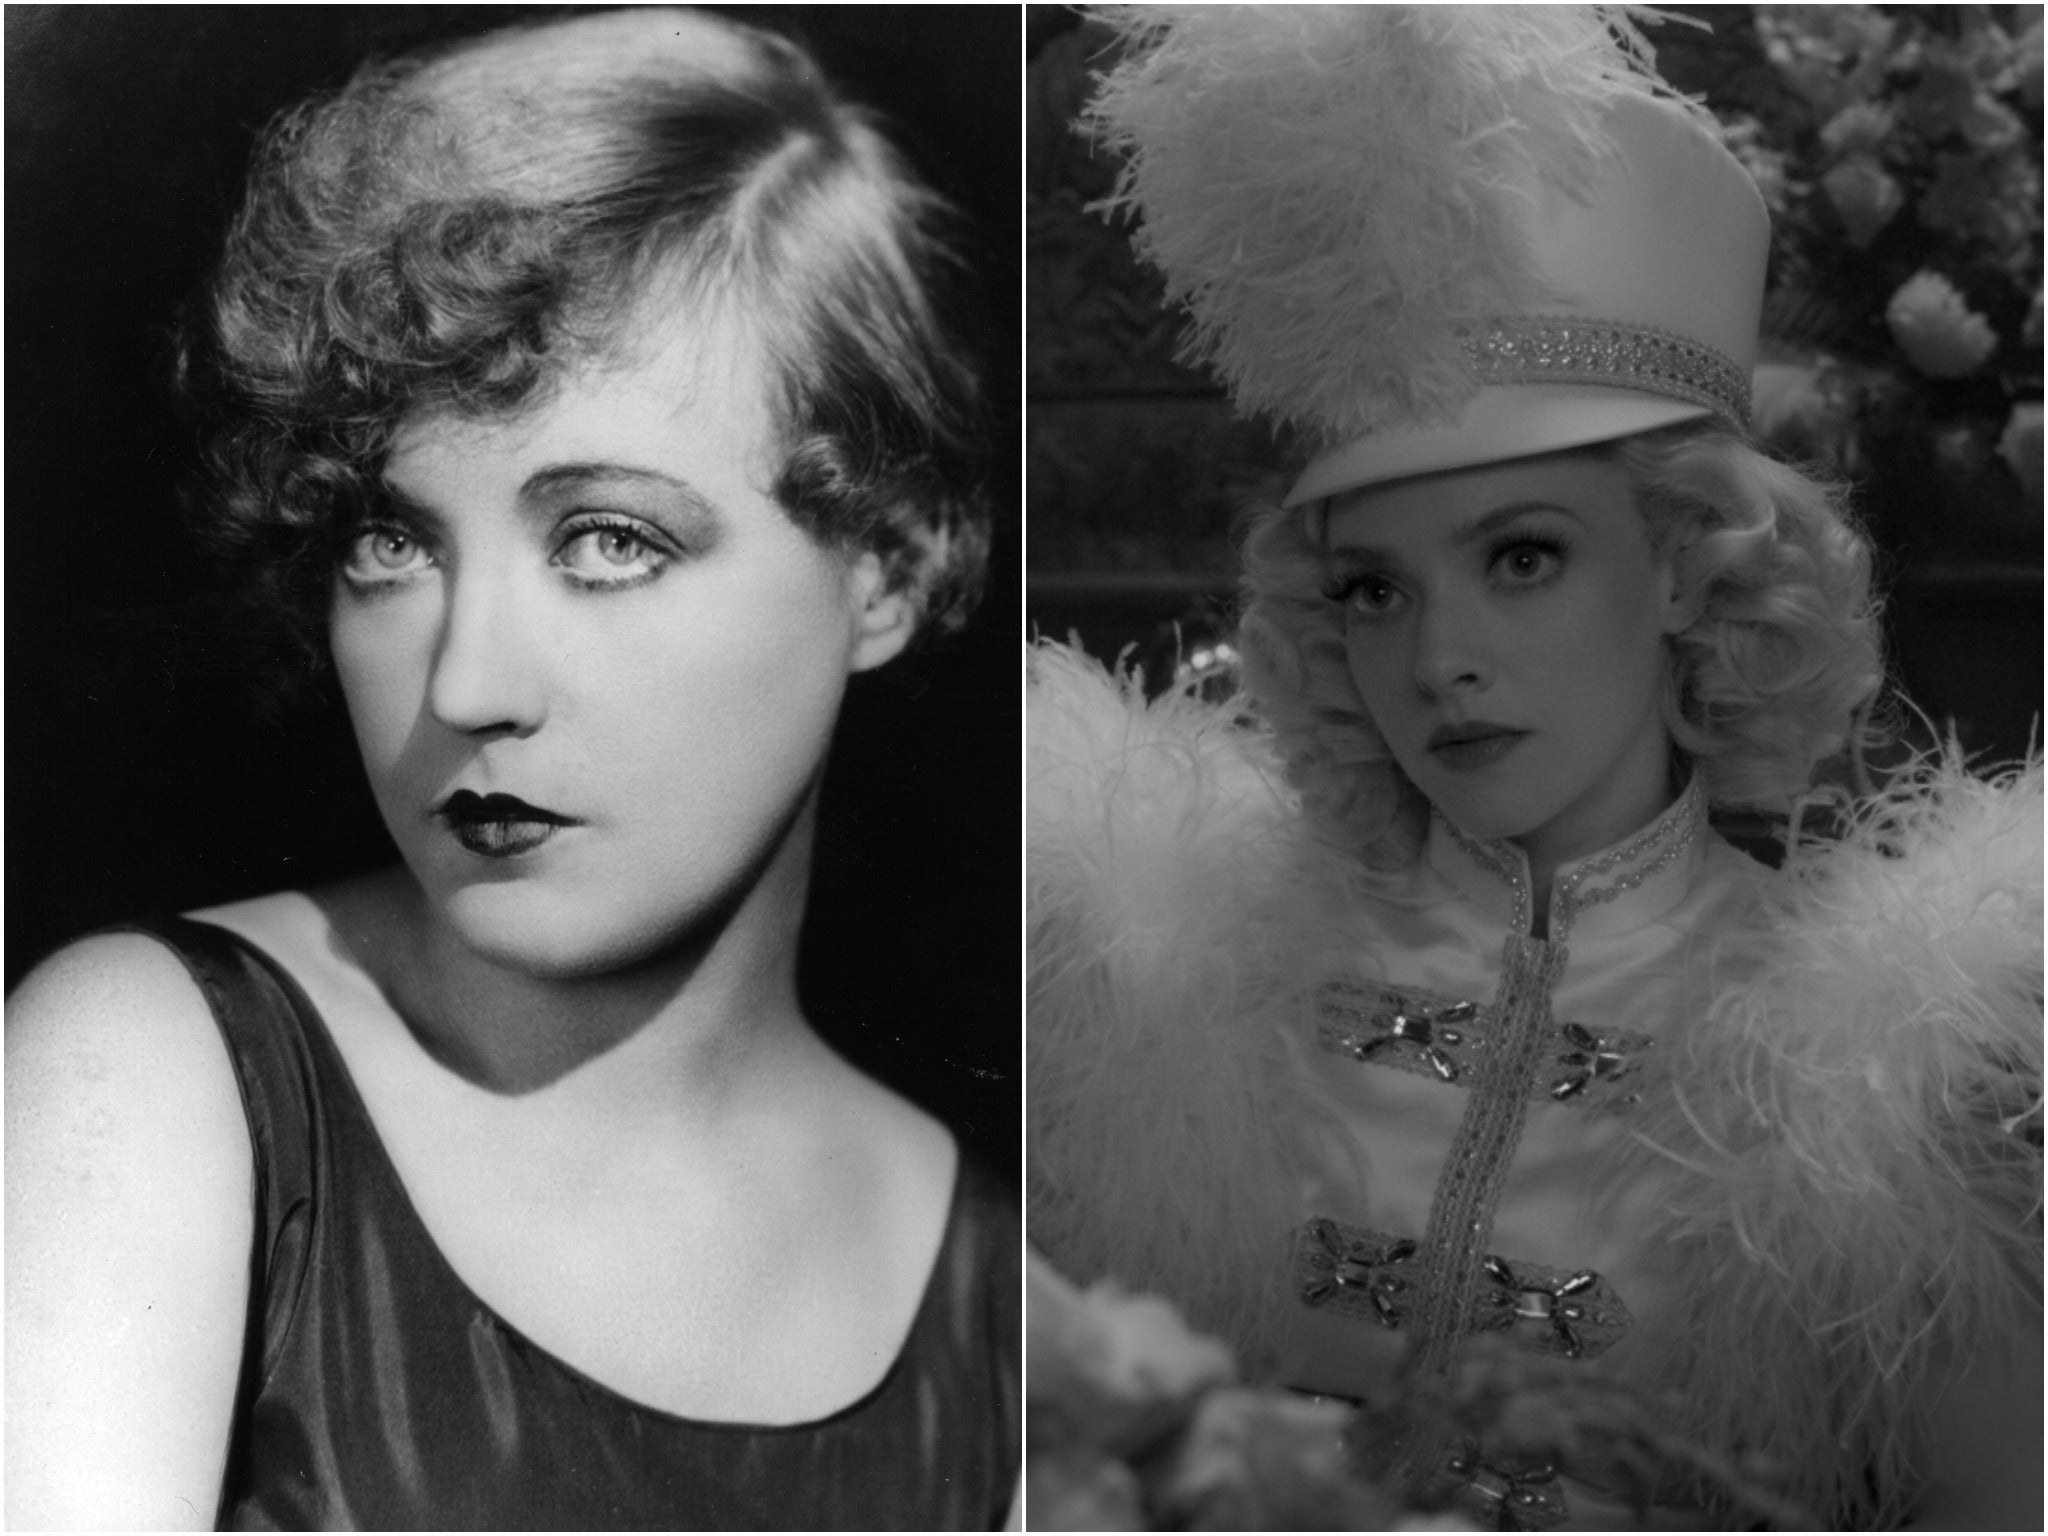 Marion Davies (left) and as portrayed by Amanda Seyfried in Mank (right)